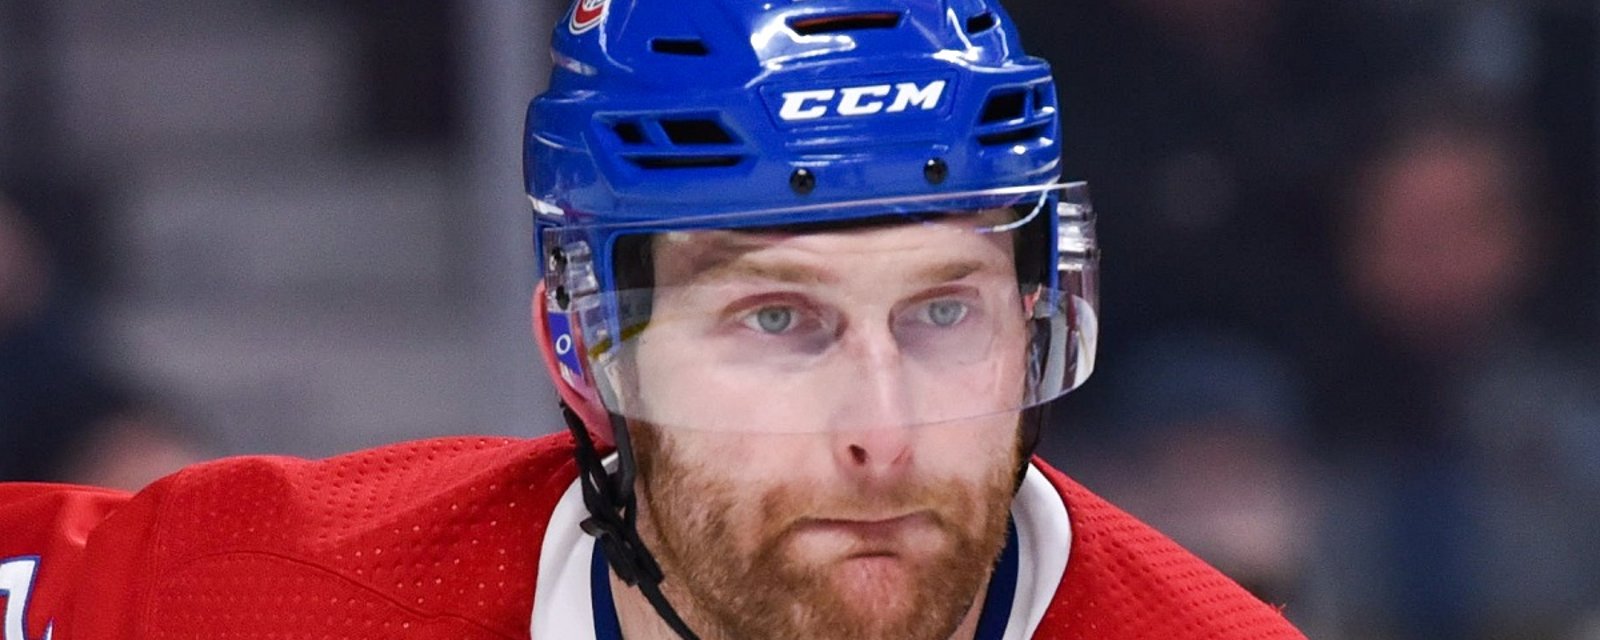 Report: Karl Alzner and Noah Juulsen held out of Habs training camp.